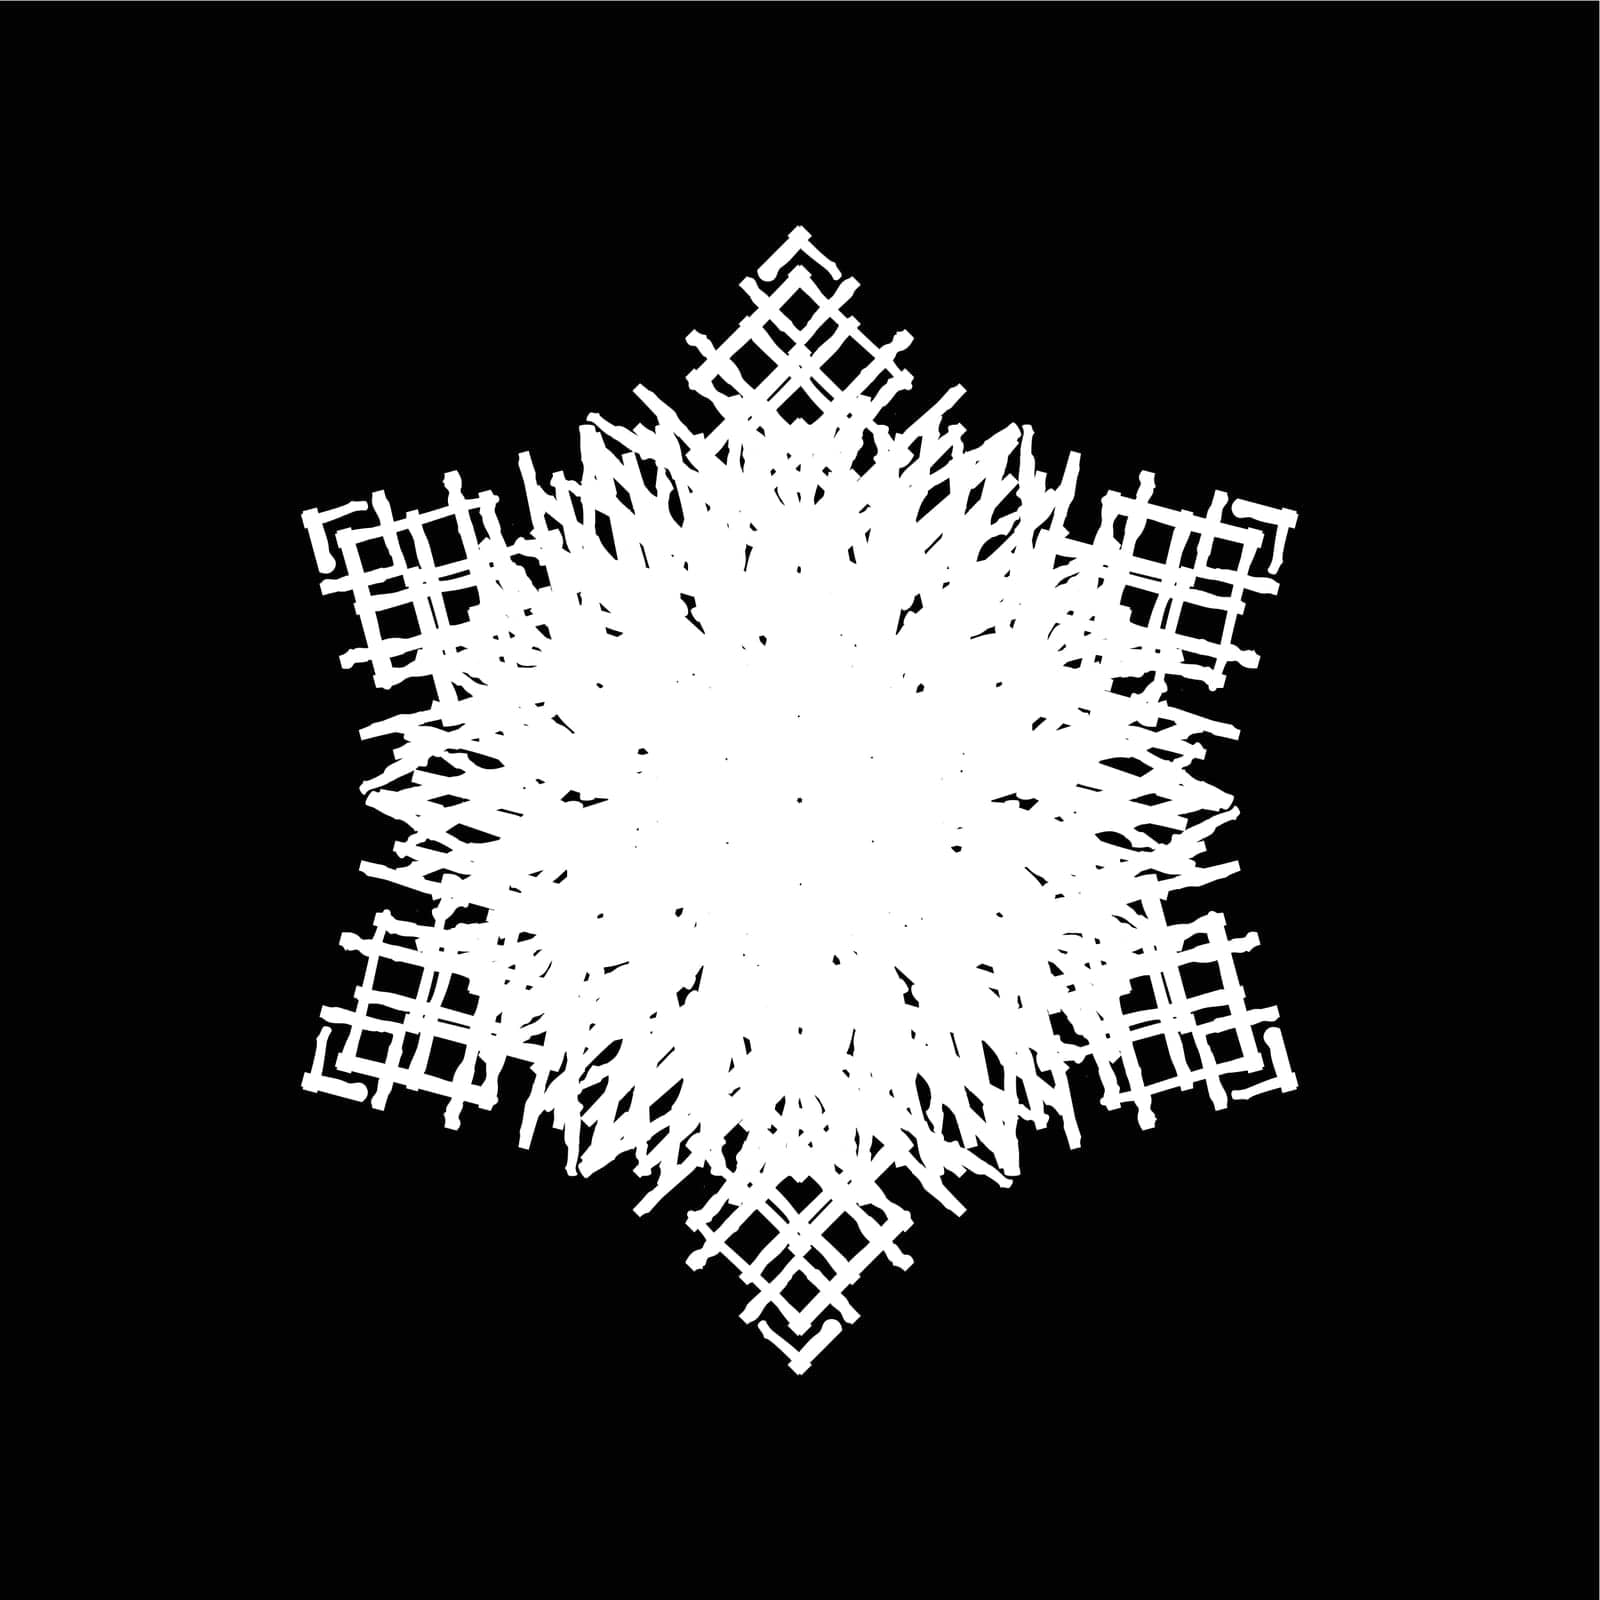 Grunge snowflake isolated. Brushed christmas design template. Distress painted snow flake shape. Icon, badge, label, certificate background. Artistic design element. EPS10 vector.